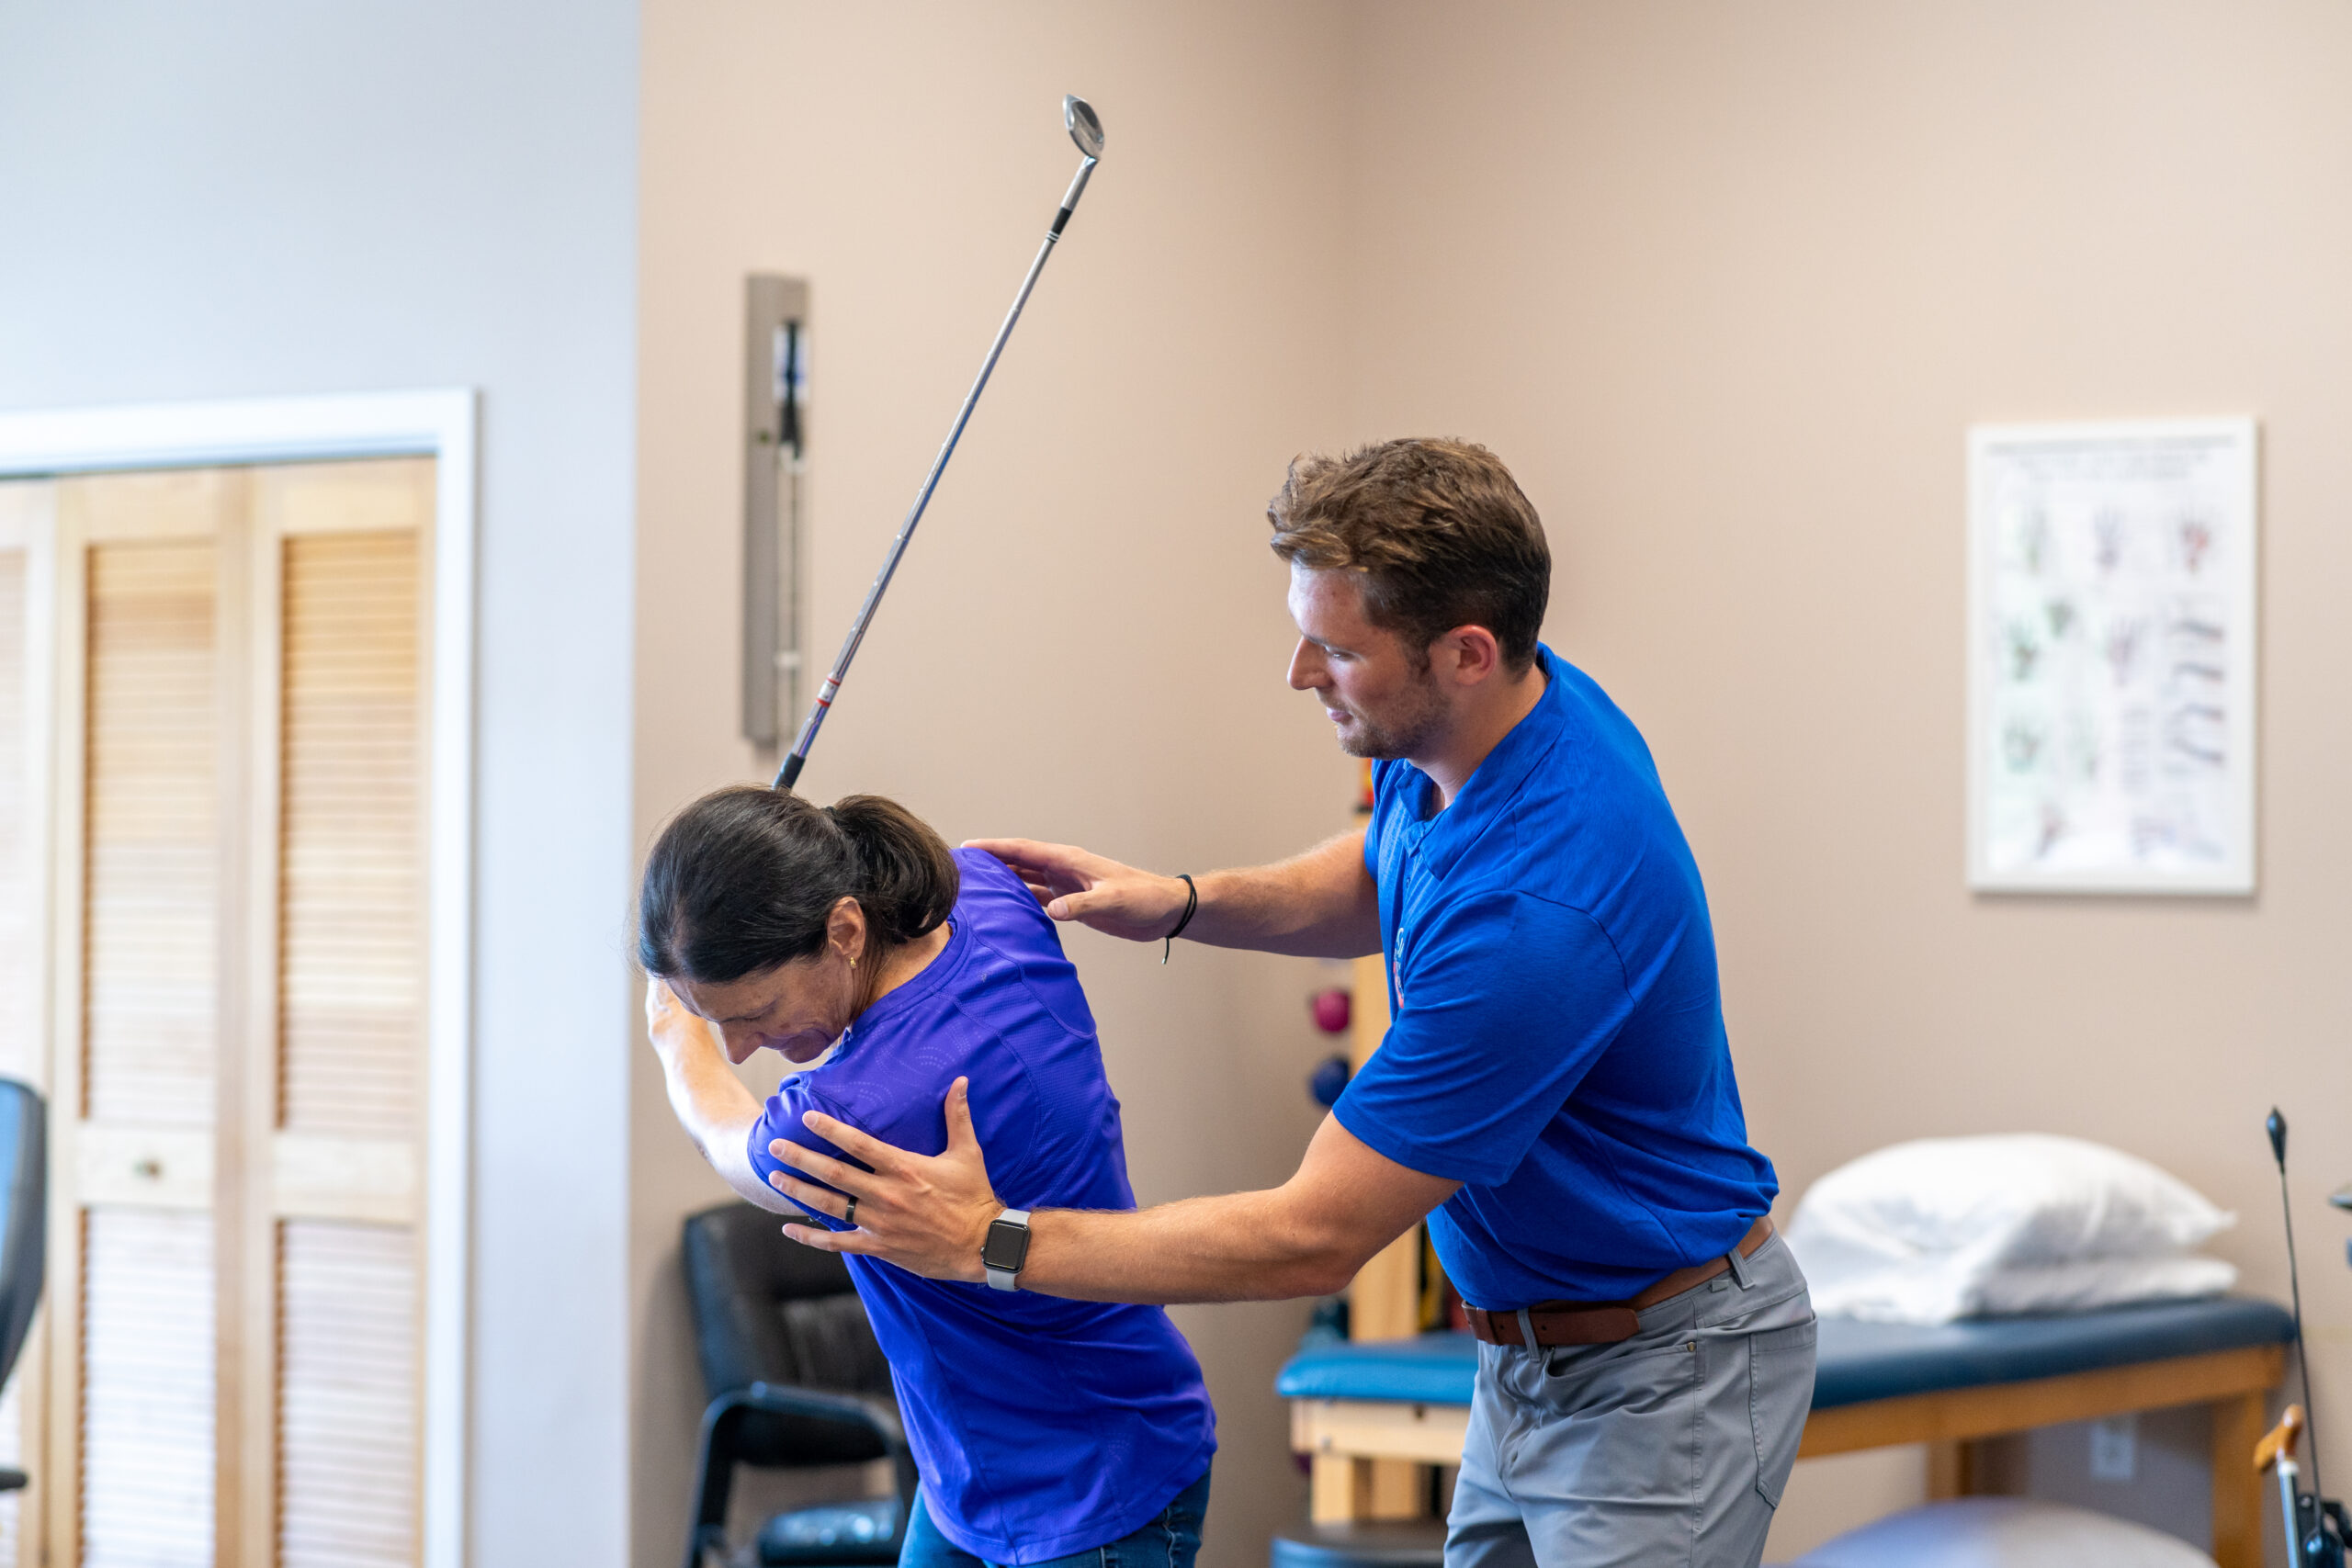 Aquacare physical therapist working with a patient on their golf swing